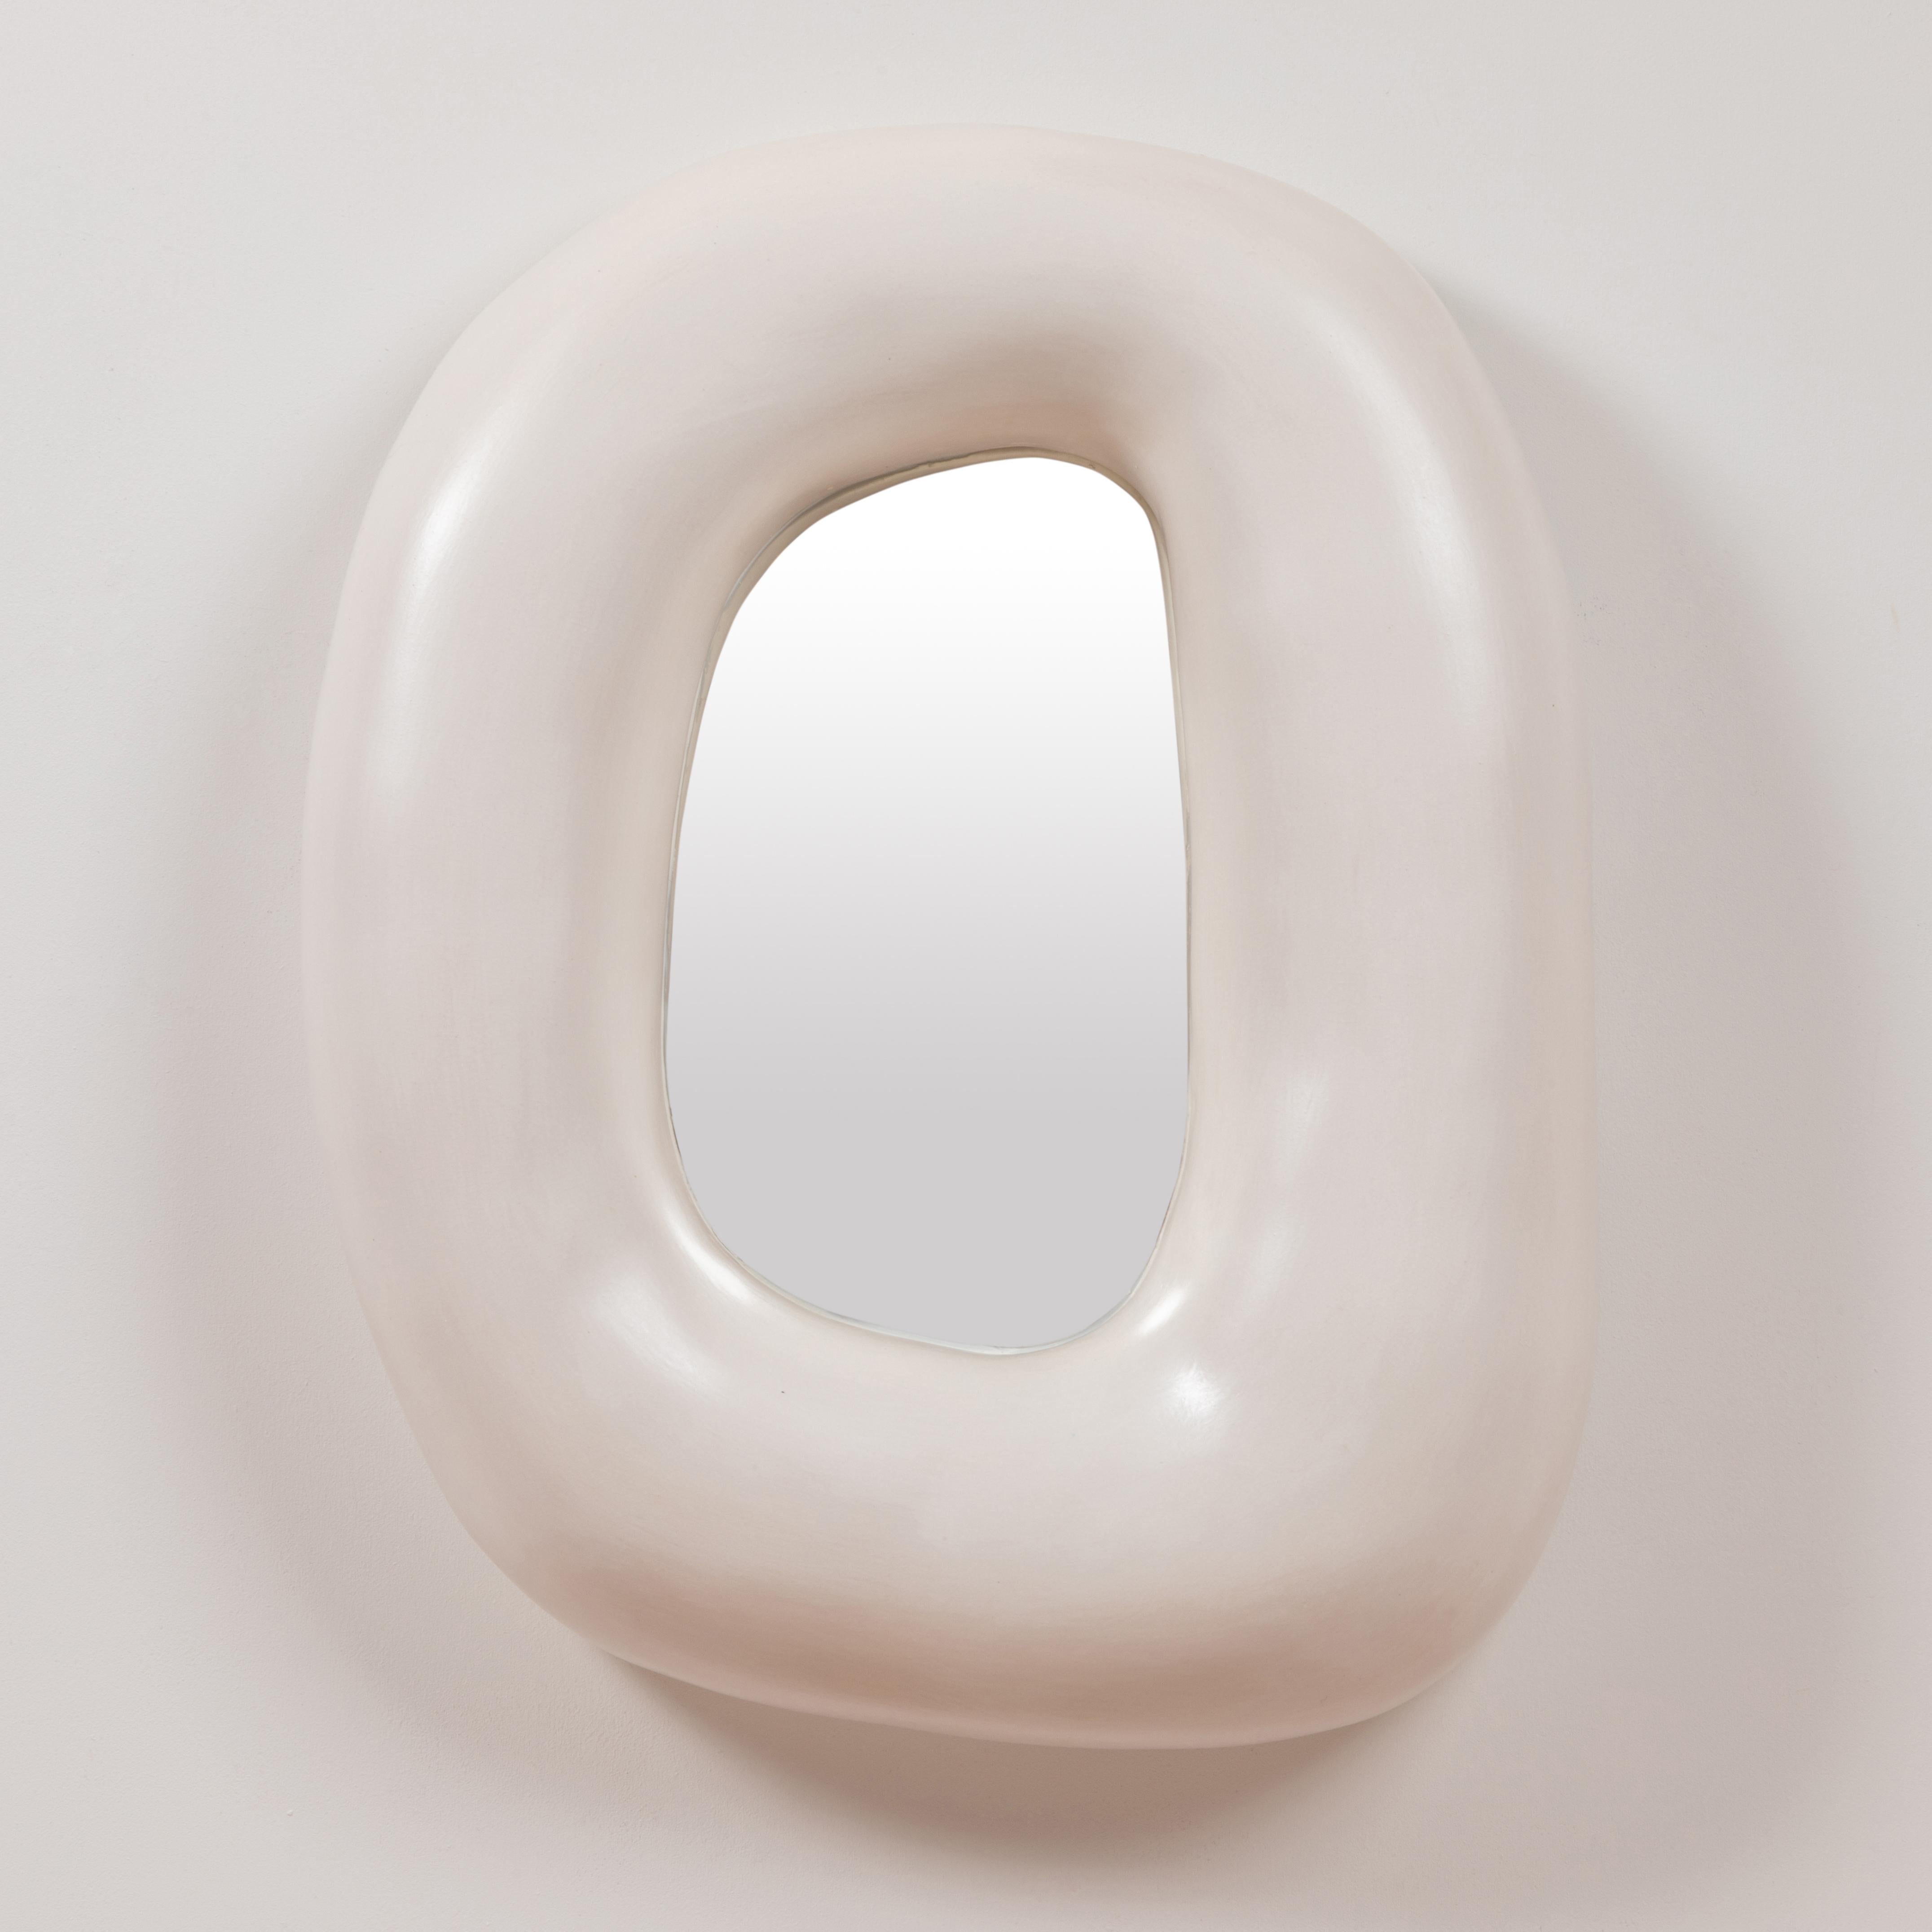 Aphrodyte White mirror by Elsa Foulon
Dimensions: D 50 x H 40 cm 
Materials: Ceramic, mirror
Unique piece

Elsa Foulon, before becoming a ceramist, was born the daughter of an antique dealer and then became a dealer in 20th century decorative arts.